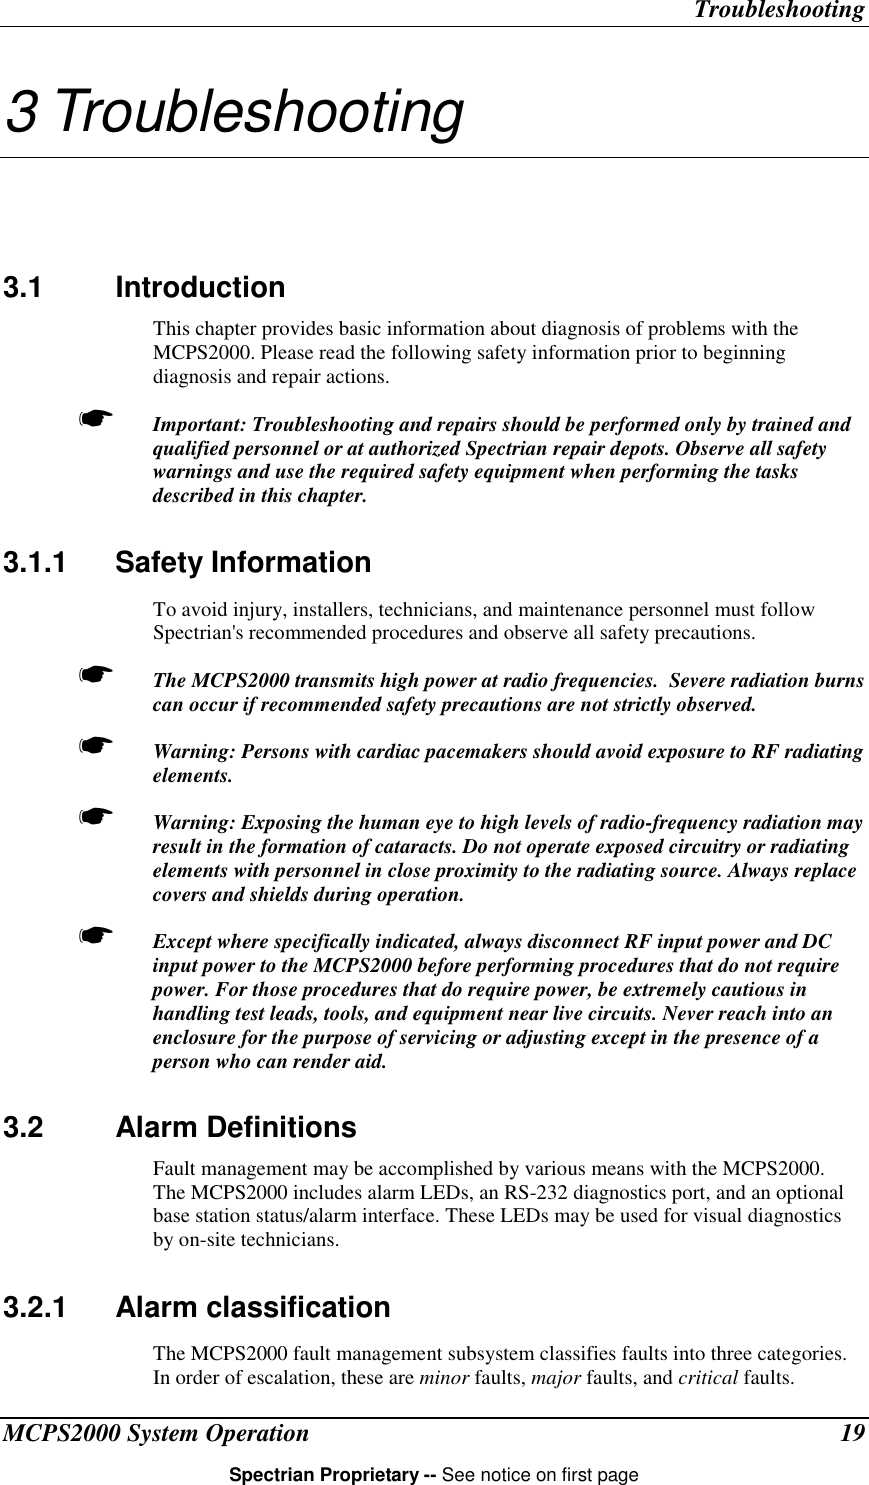 TroubleshootingMCPS2000 System Operation 19Spectrian Proprietary -- See notice on first page3 Troubleshooting3.1 IntroductionThis chapter provides basic information about diagnosis of problems with theMCPS2000. Please read the following safety information prior to beginningdiagnosis and repair actions.☛ Important: Troubleshooting and repairs should be performed only by trained andqualified personnel or at authorized Spectrian repair depots. Observe all safetywarnings and use the required safety equipment when performing the tasksdescribed in this chapter.3.1.1 Safety InformationTo avoid injury, installers, technicians, and maintenance personnel must followSpectrian&apos;s recommended procedures and observe all safety precautions.☛ The MCPS2000 transmits high power at radio frequencies.  Severe radiation burnscan occur if recommended safety precautions are not strictly observed.☛ Warning: Persons with cardiac pacemakers should avoid exposure to RF radiatingelements.☛ Warning: Exposing the human eye to high levels of radio-frequency radiation mayresult in the formation of cataracts. Do not operate exposed circuitry or radiatingelements with personnel in close proximity to the radiating source. Always replacecovers and shields during operation.☛ Except where specifically indicated, always disconnect RF input power and DCinput power to the MCPS2000 before performing procedures that do not requirepower. For those procedures that do require power, be extremely cautious inhandling test leads, tools, and equipment near live circuits. Never reach into anenclosure for the purpose of servicing or adjusting except in the presence of aperson who can render aid.3.2 Alarm DefinitionsFault management may be accomplished by various means with the MCPS2000.The MCPS2000 includes alarm LEDs, an RS-232 diagnostics port, and an optionalbase station status/alarm interface. These LEDs may be used for visual diagnosticsby on-site technicians.3.2.1 Alarm classificationThe MCPS2000 fault management subsystem classifies faults into three categories.In order of escalation, these are minor faults, major faults, and critical faults.